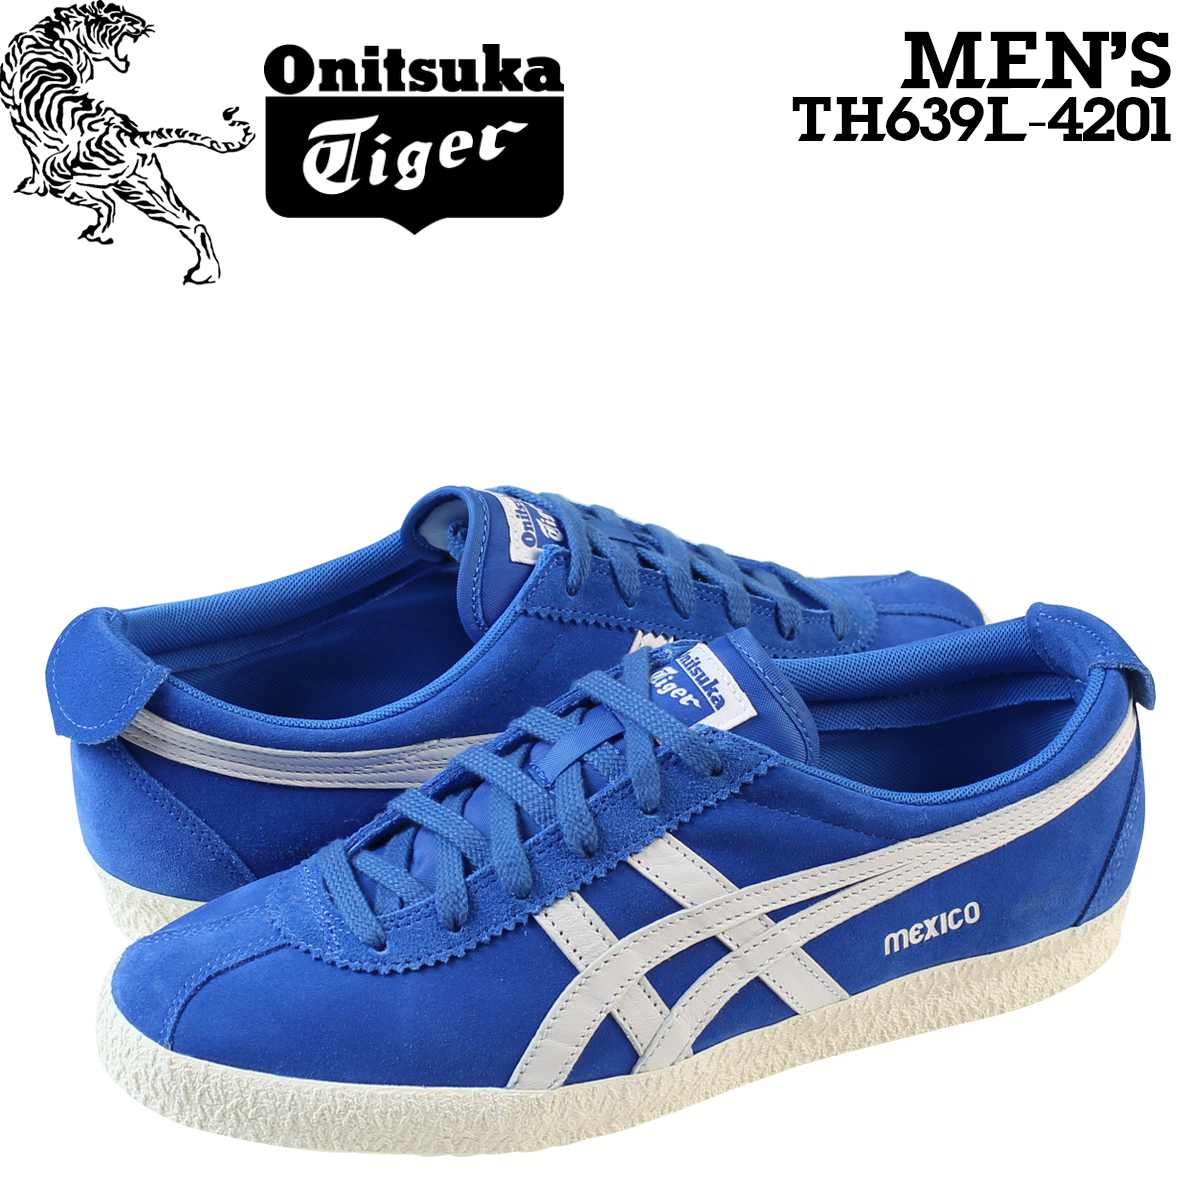 onitsuka tiger shoes for sale south africa